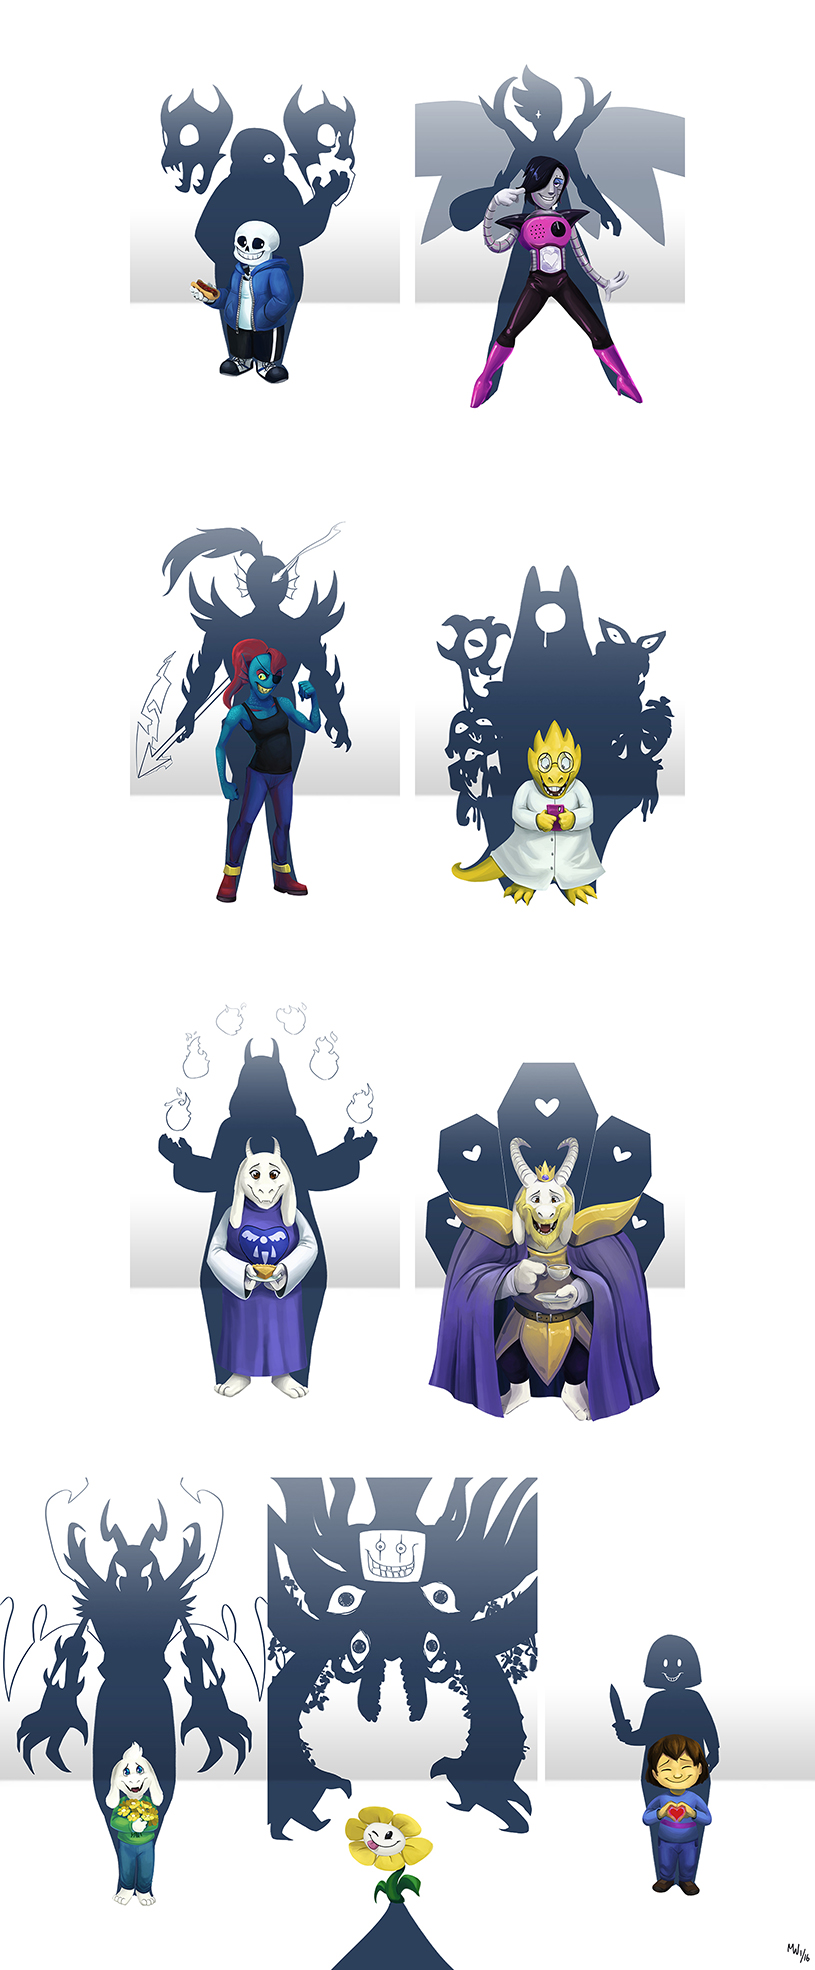 &lt;3 2016 ;p alphys amalgamate android animated_skeleton anthro armor asgore_dreemurr asriel_dreemurr beverage blaster blue_skin bone boss_monster cape caprine clothing coffin crown deity dinosaur endogeny evil_grin eye_patch eyewear female fire fish flowey_the_flower food footwear gaster_blaster gills glasses goat group hair hoodie hot_dog human humanoid knife lemon_bread lizard long_hair looking_at_viewer lynxgriffin machine magic_user male mammal marine melee_weapon memoryhead mettaton mettaton_neo monster phone photoshop_flowey pie polearm ponytail protagonist_(undertale) reaper_bird reptile robes robot royalty sans_(undertale) scalie shoes silhouette simple_background skeleton smile snowdrake's_mother soul spear tea tea_cup television toriel undead undertale undyne undyne_the_undying video_games weapon white_background wings yellow_eyes young